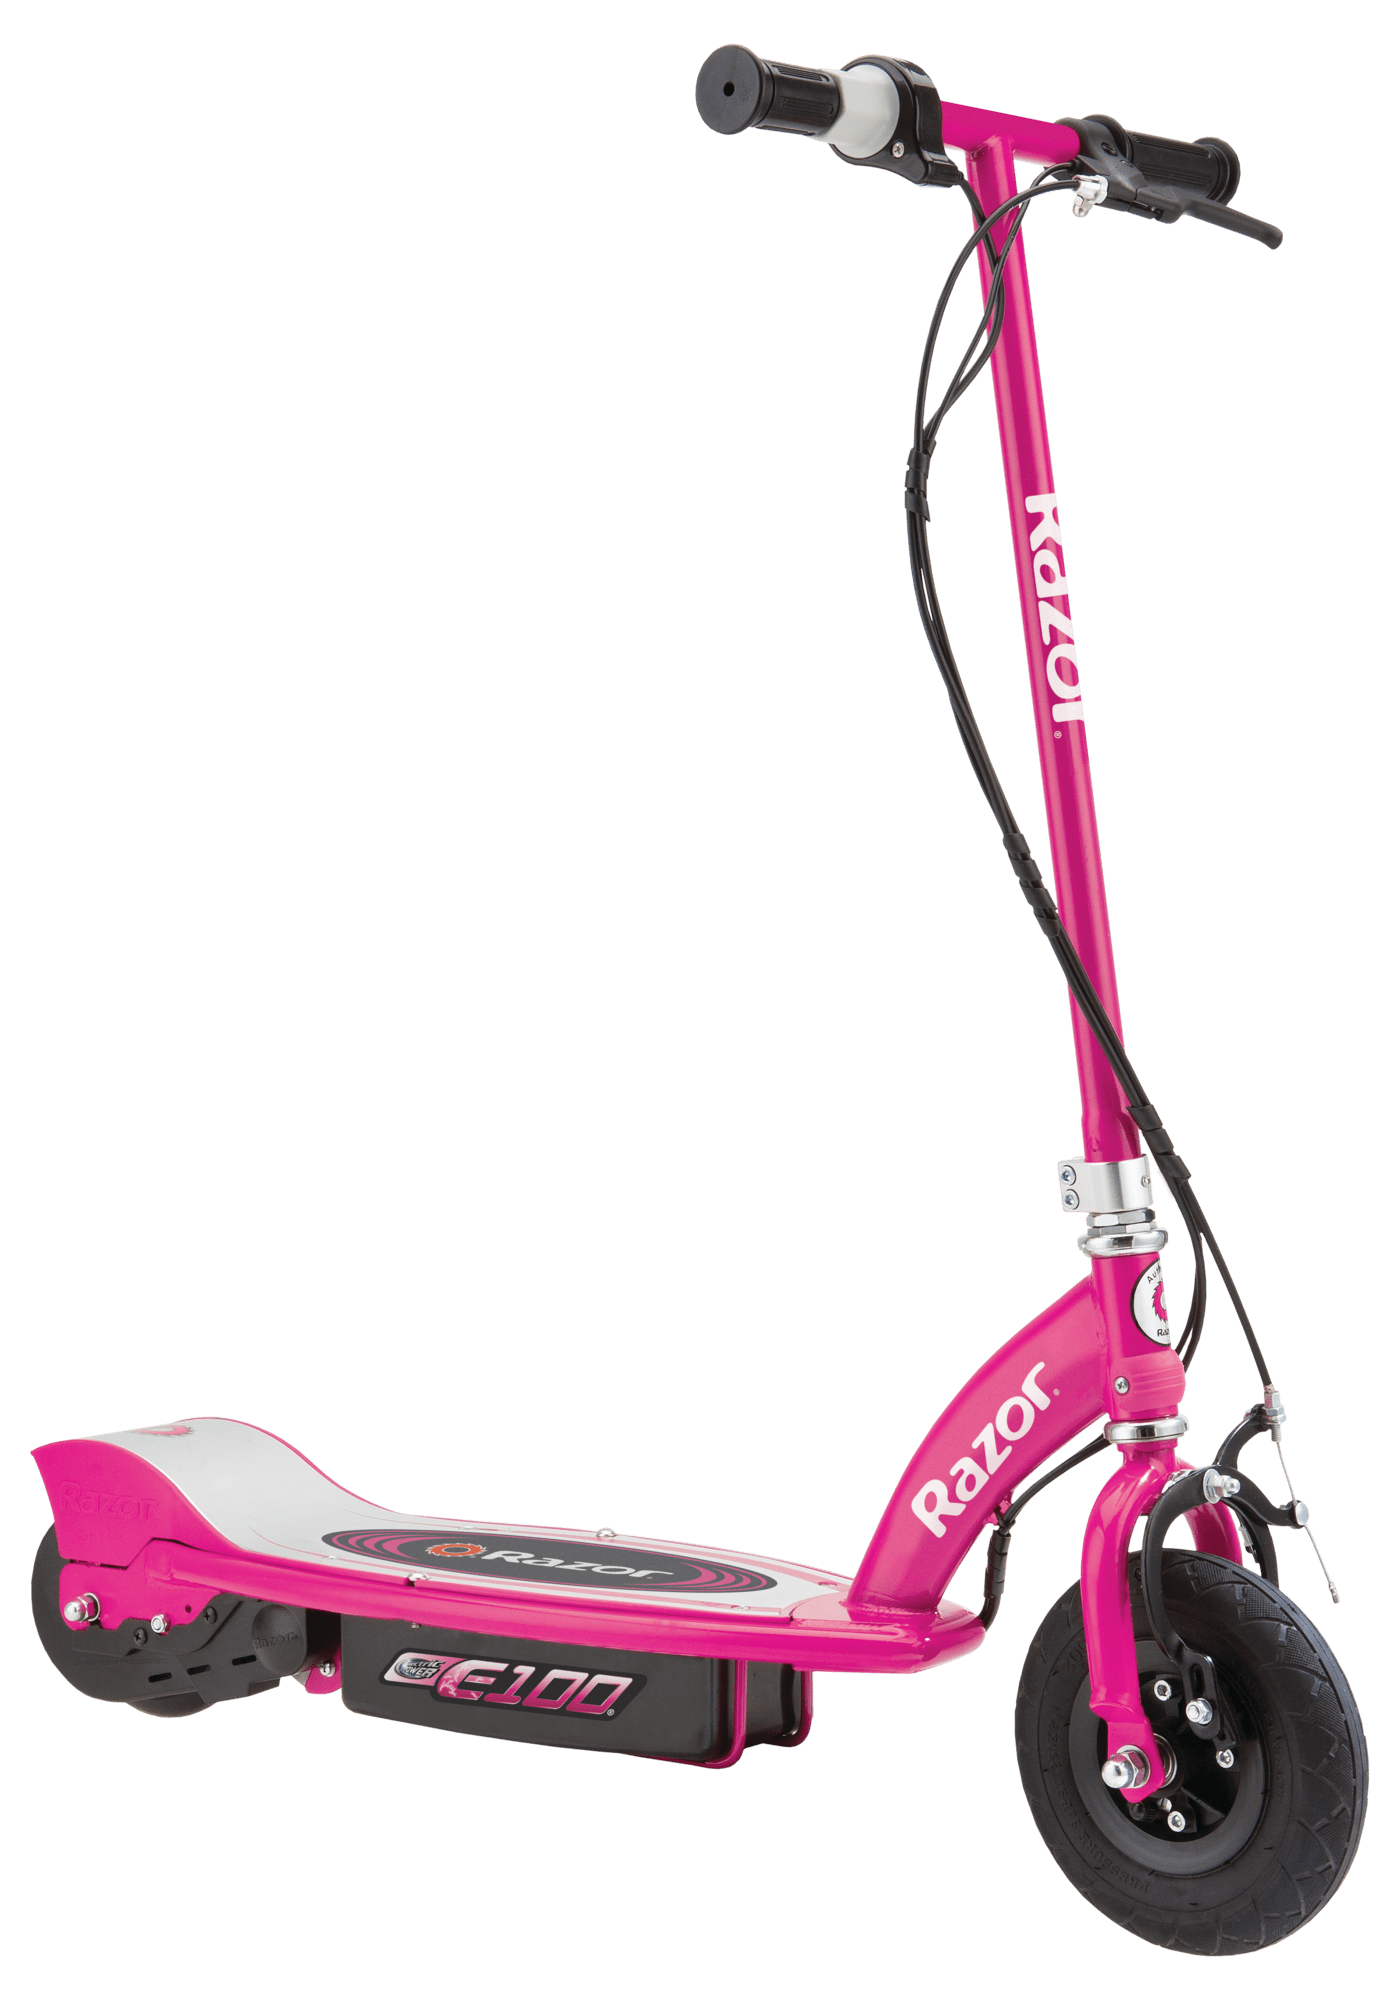 Razor Electric Scooter Pink Razor E100 Electric Scooter - Glow